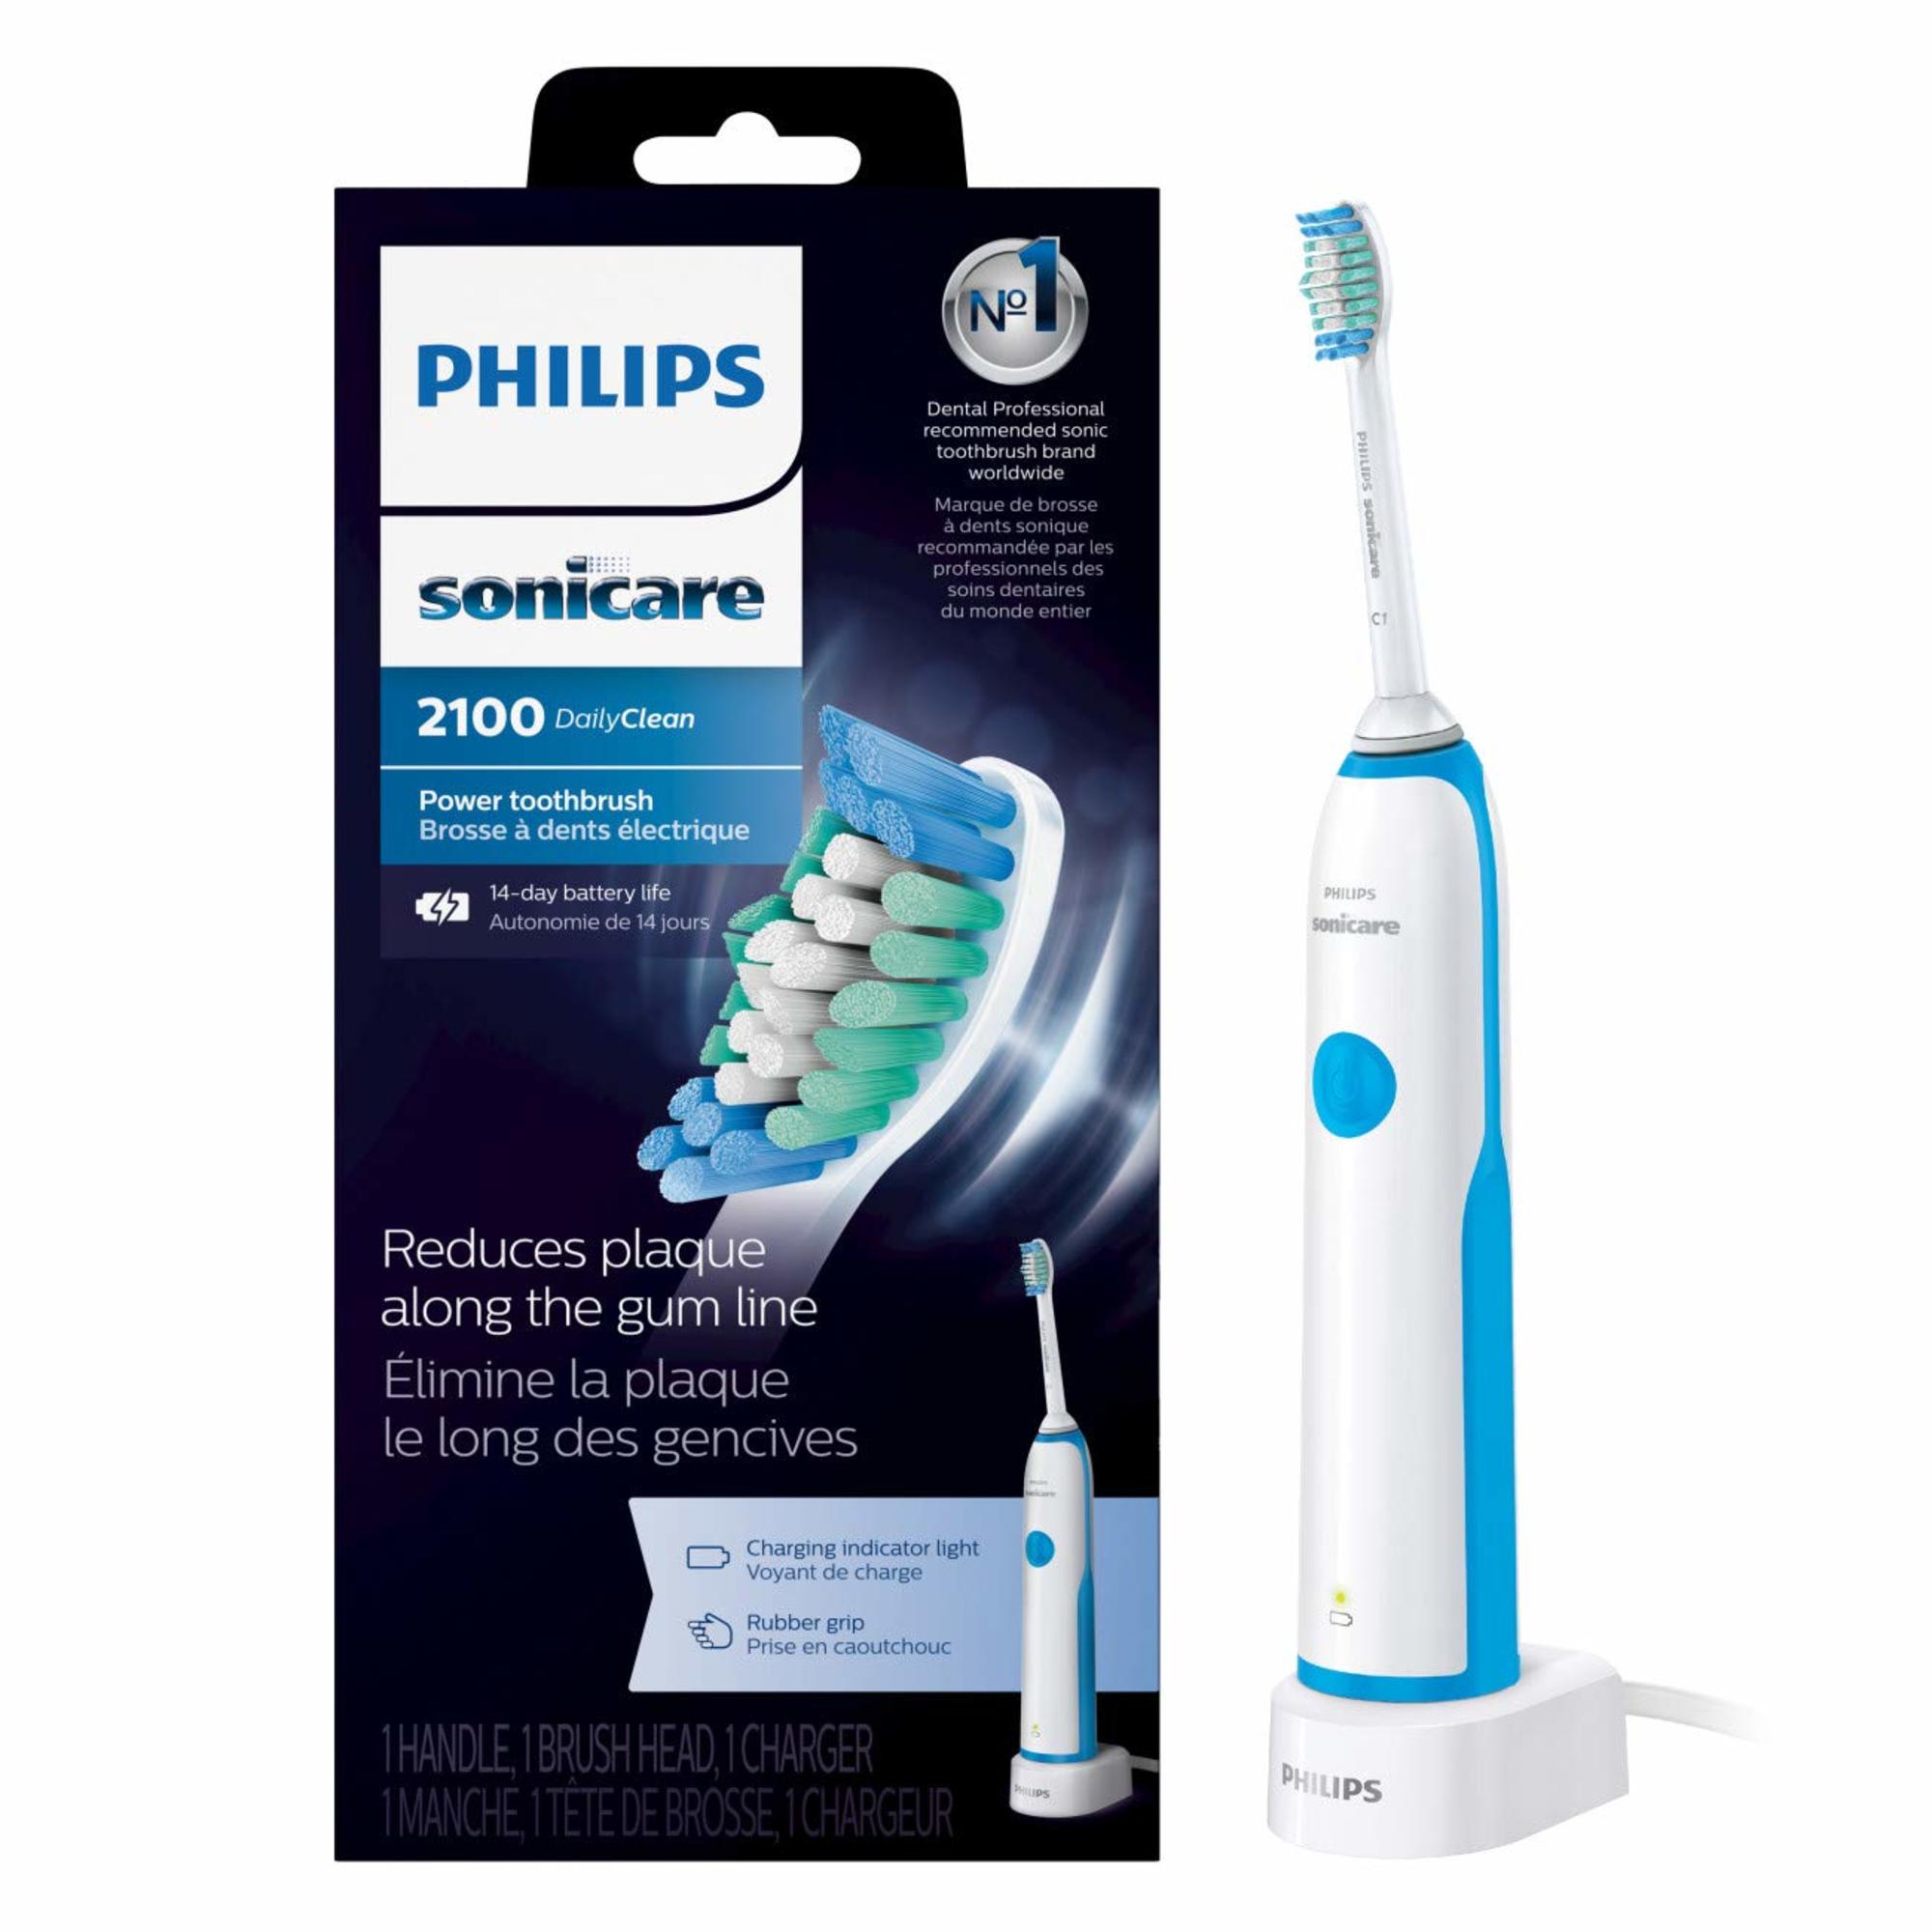 Philips Sonicare Dailyclean 2100 Rechargeable Electric Toothbrush, HX3211/17 - image 1 of 13